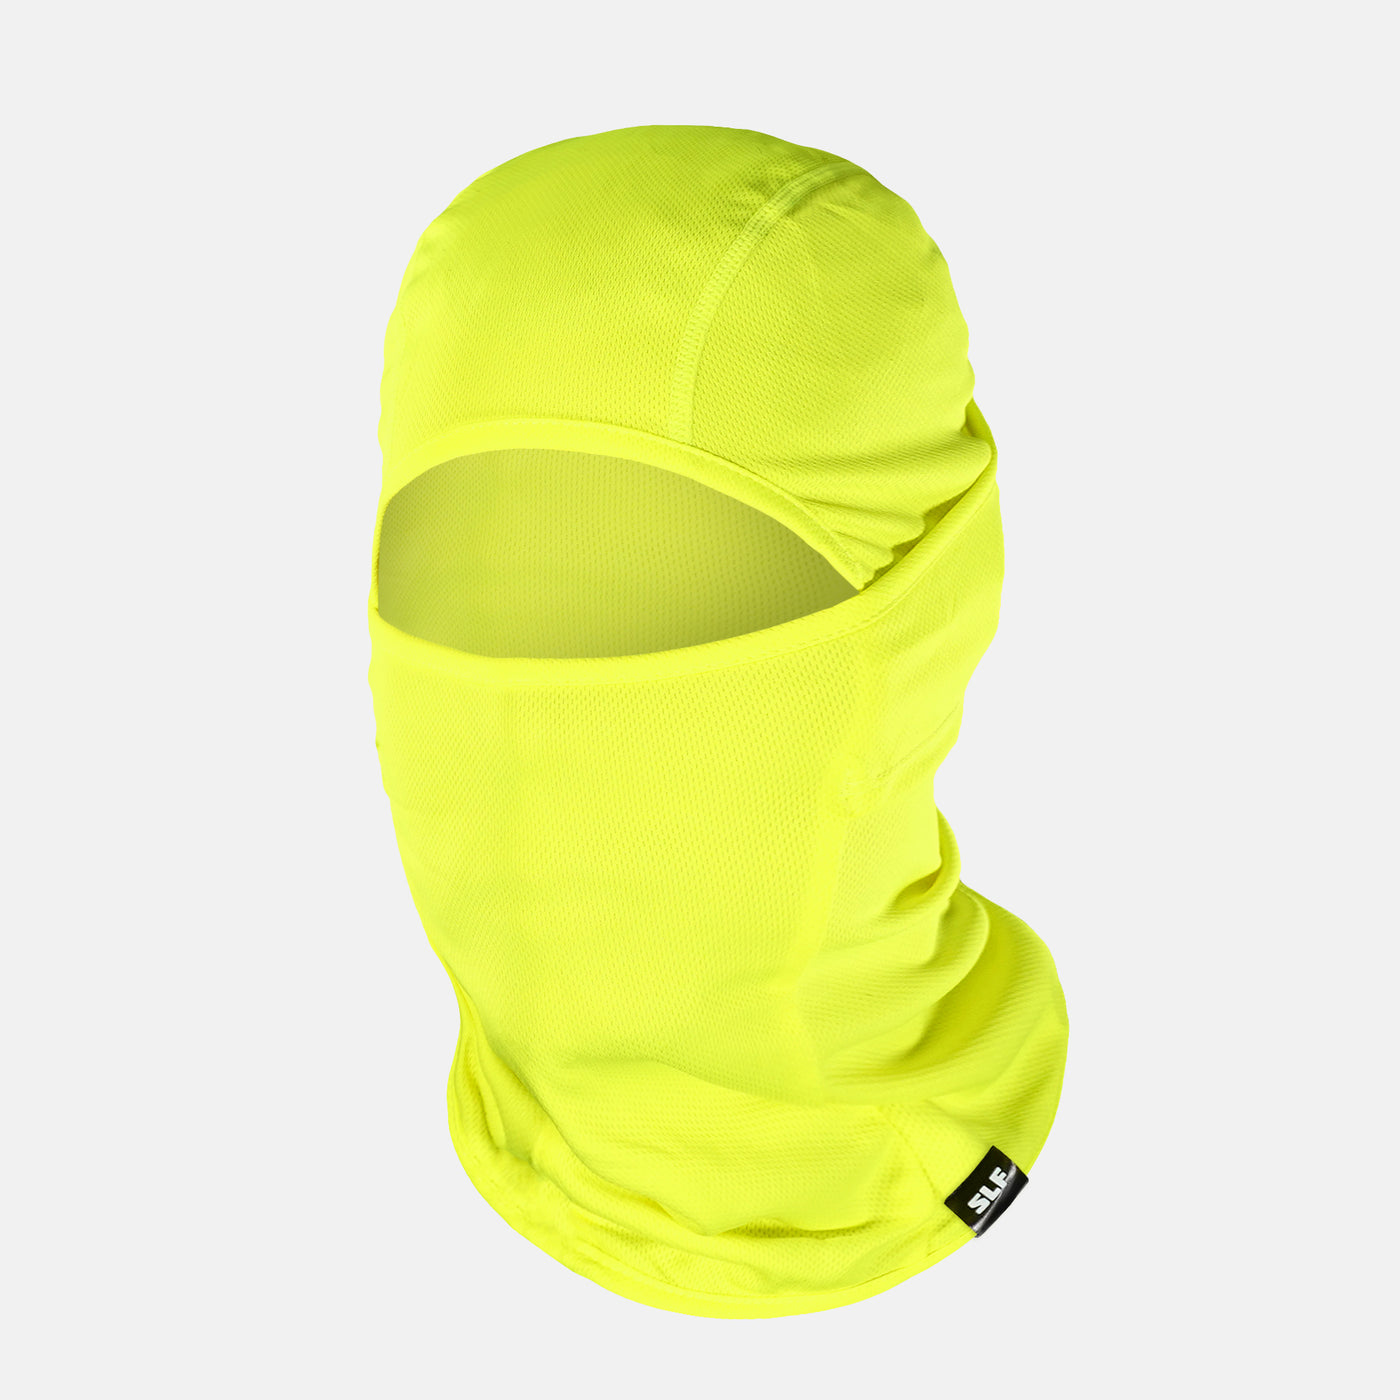 Safety Yellow Loose-fitting Shiesty Mask